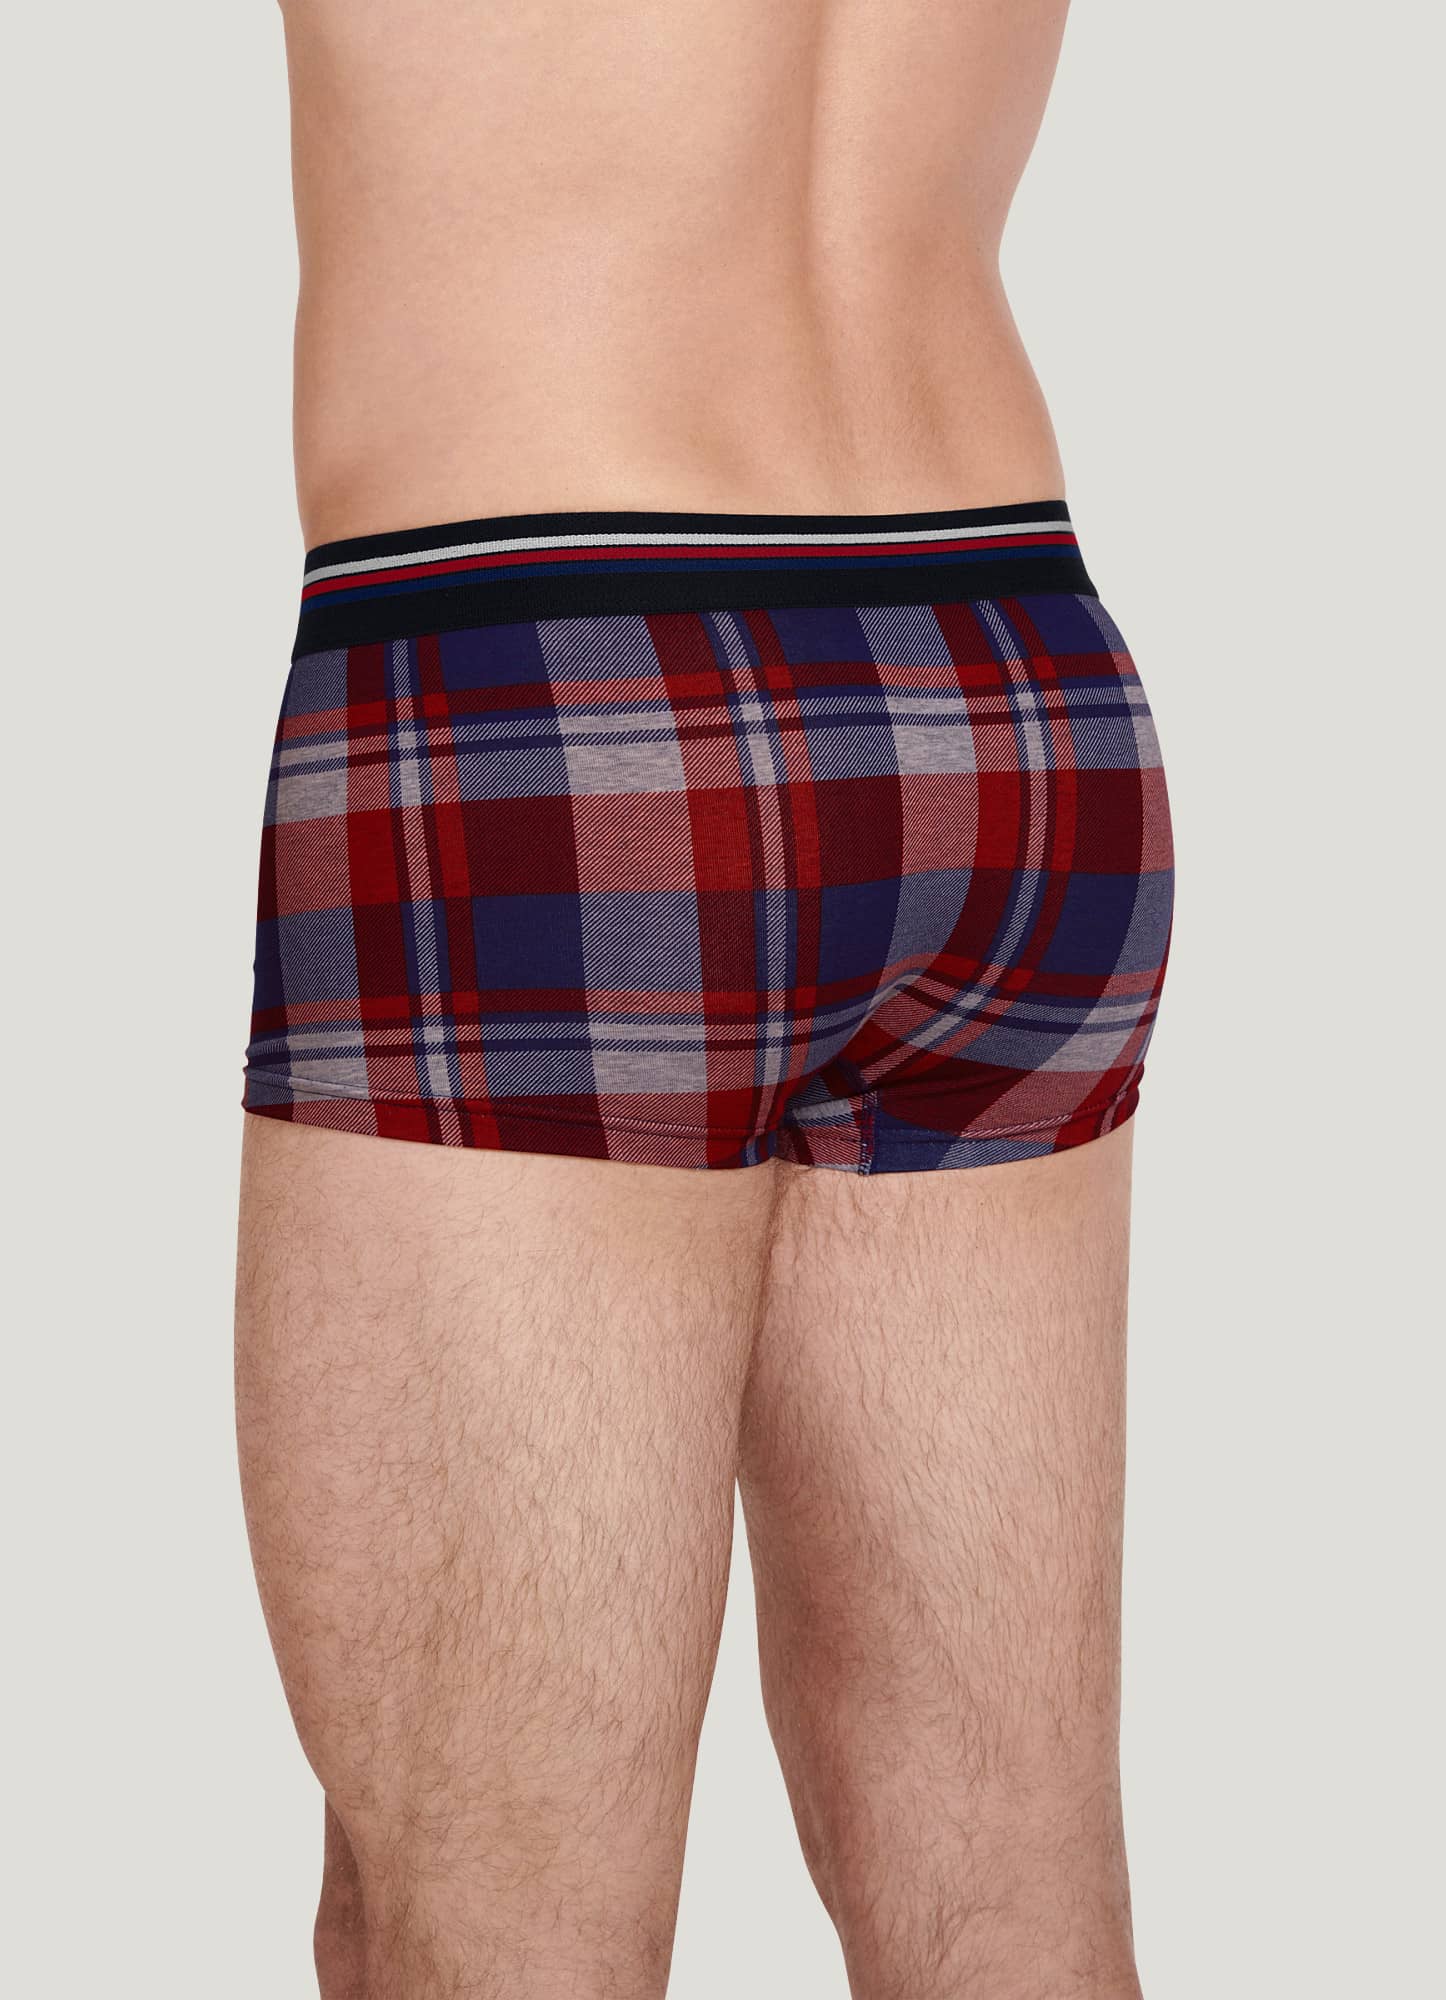  Jockey Men's Underwear Organic Cotton Stretch 4 Trunk - 3  Pack, Bayou/True Navy/Leather Red, S : Clothing, Shoes & Jewelry